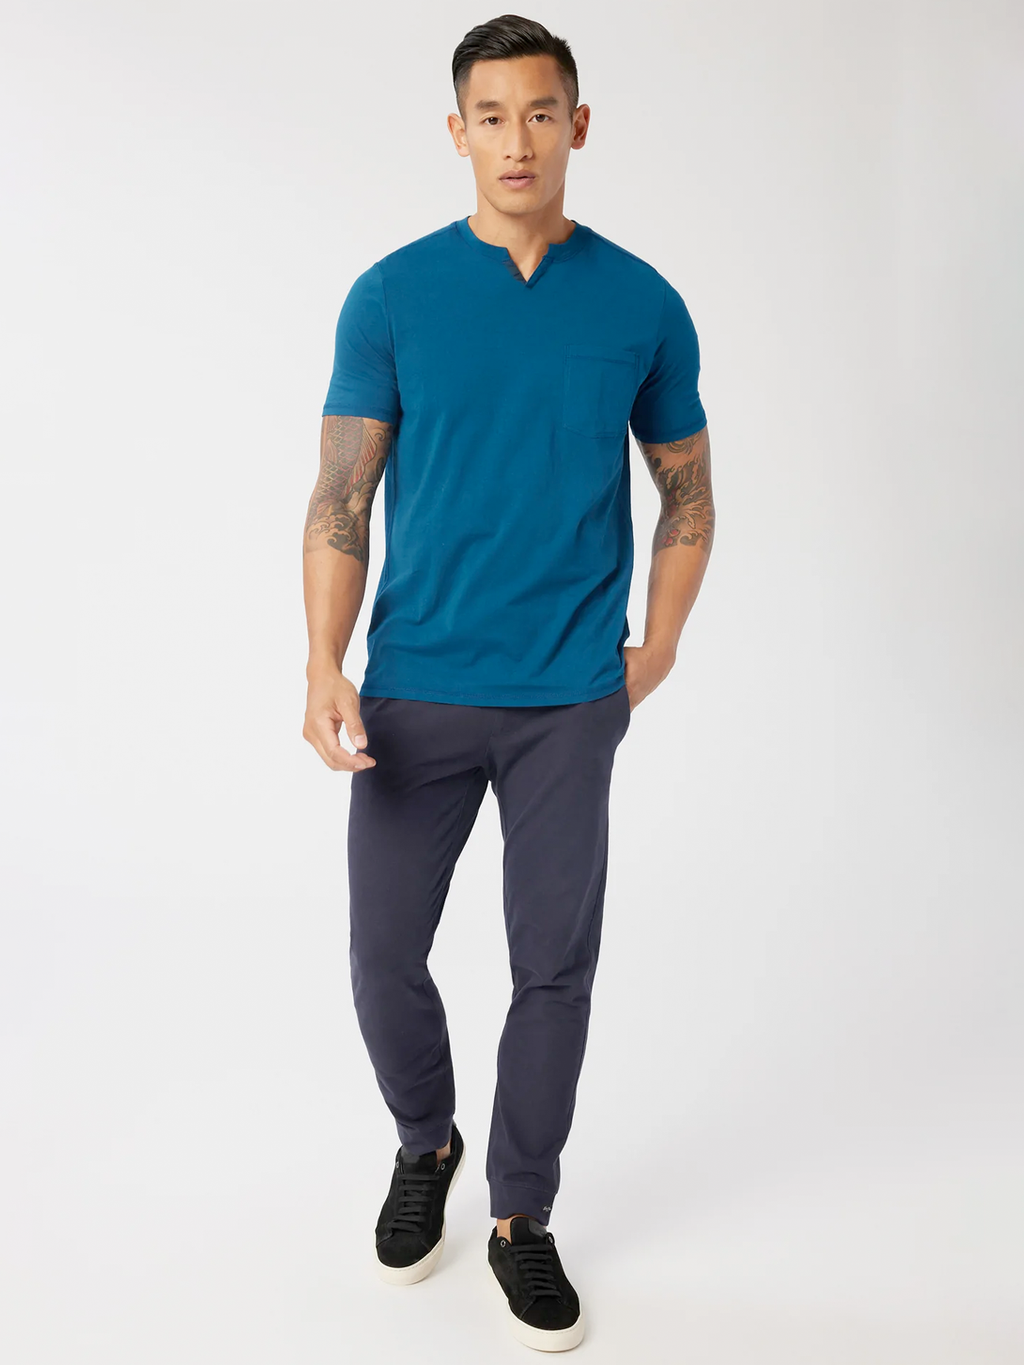 Victory V-Notch Tee in Sea